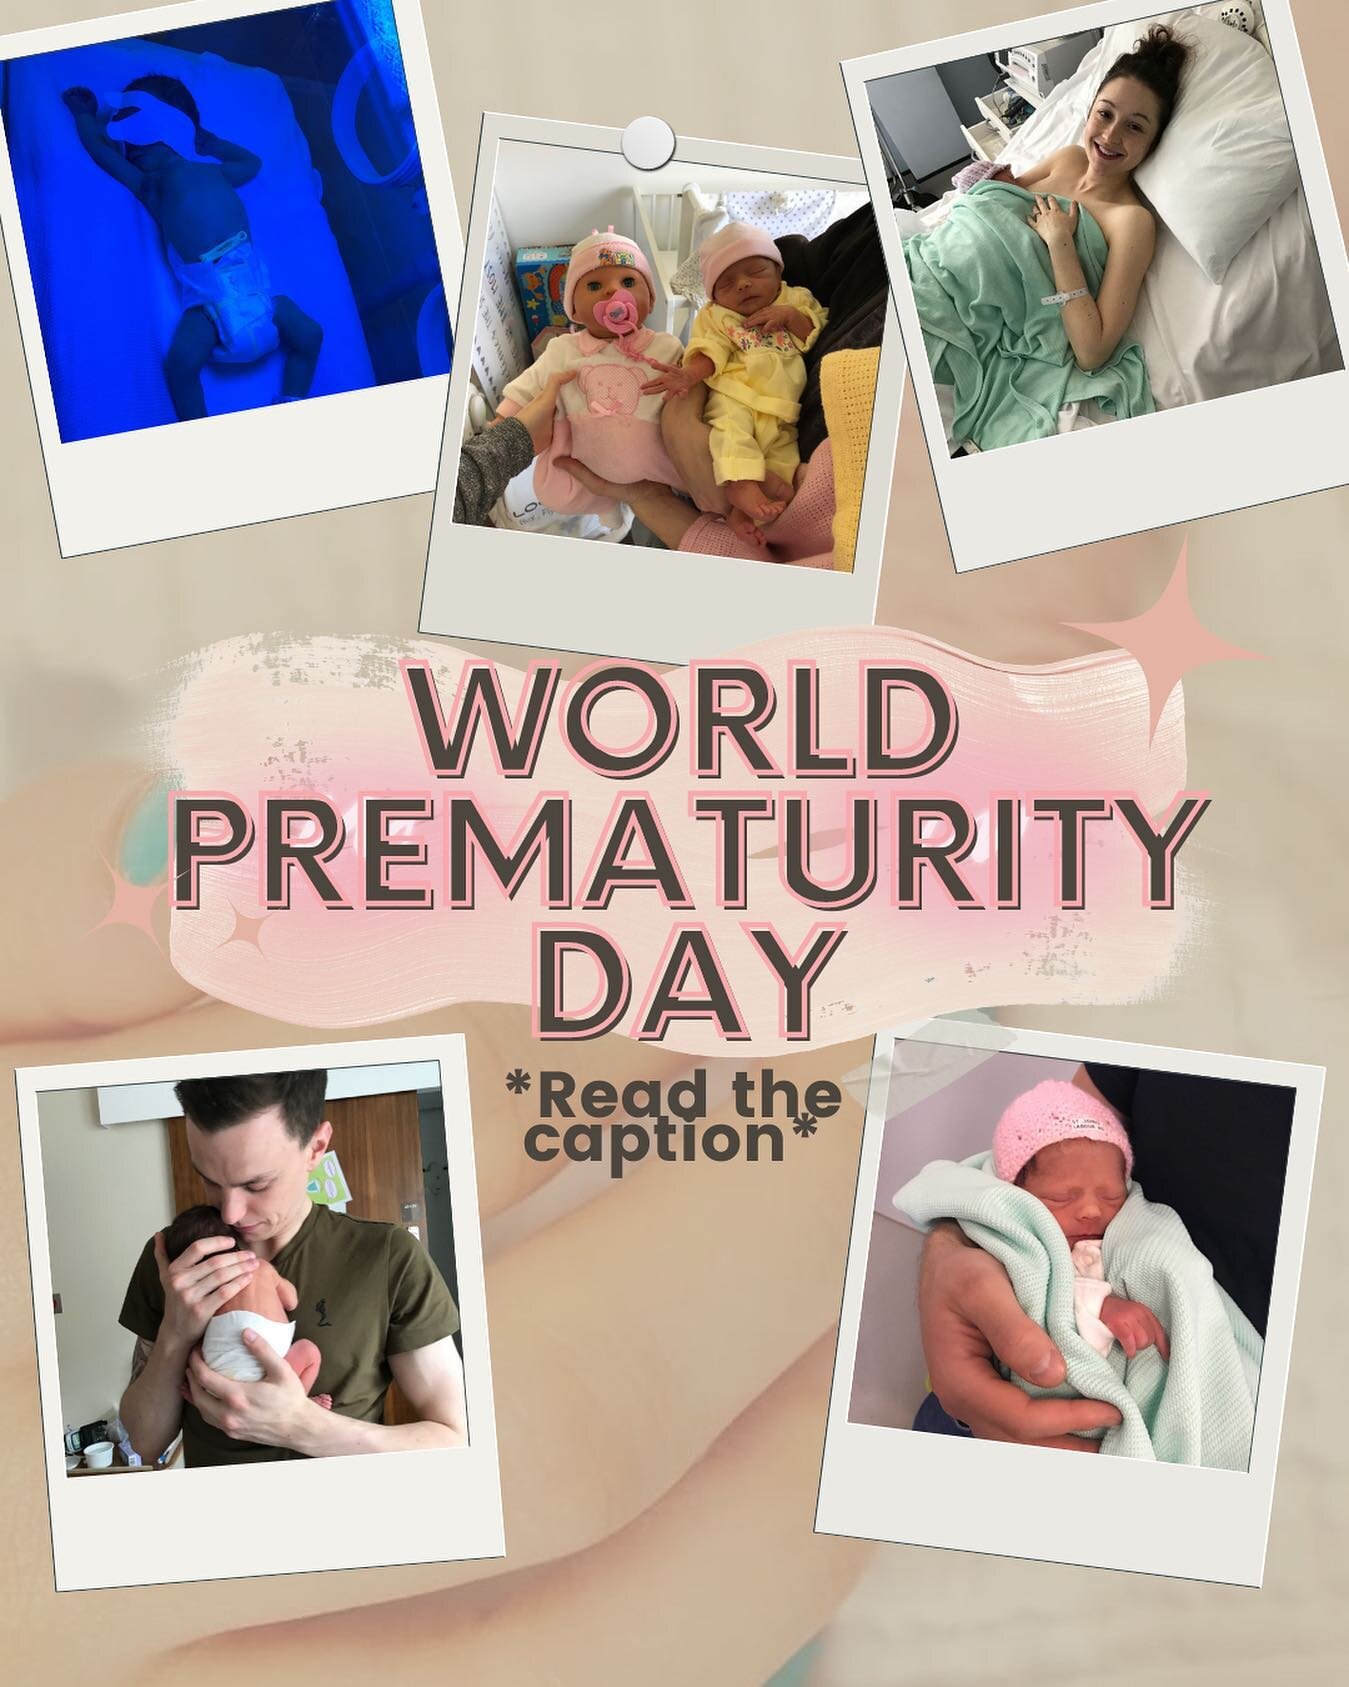 Today is World Prematurity Day, and with around 8% of babies (around 60,000 each year) being born prematurely in the UK, it&rsquo;s one that&rsquo;s close to many families hearts, including my own. Premature birth can happen for many reasons and babi